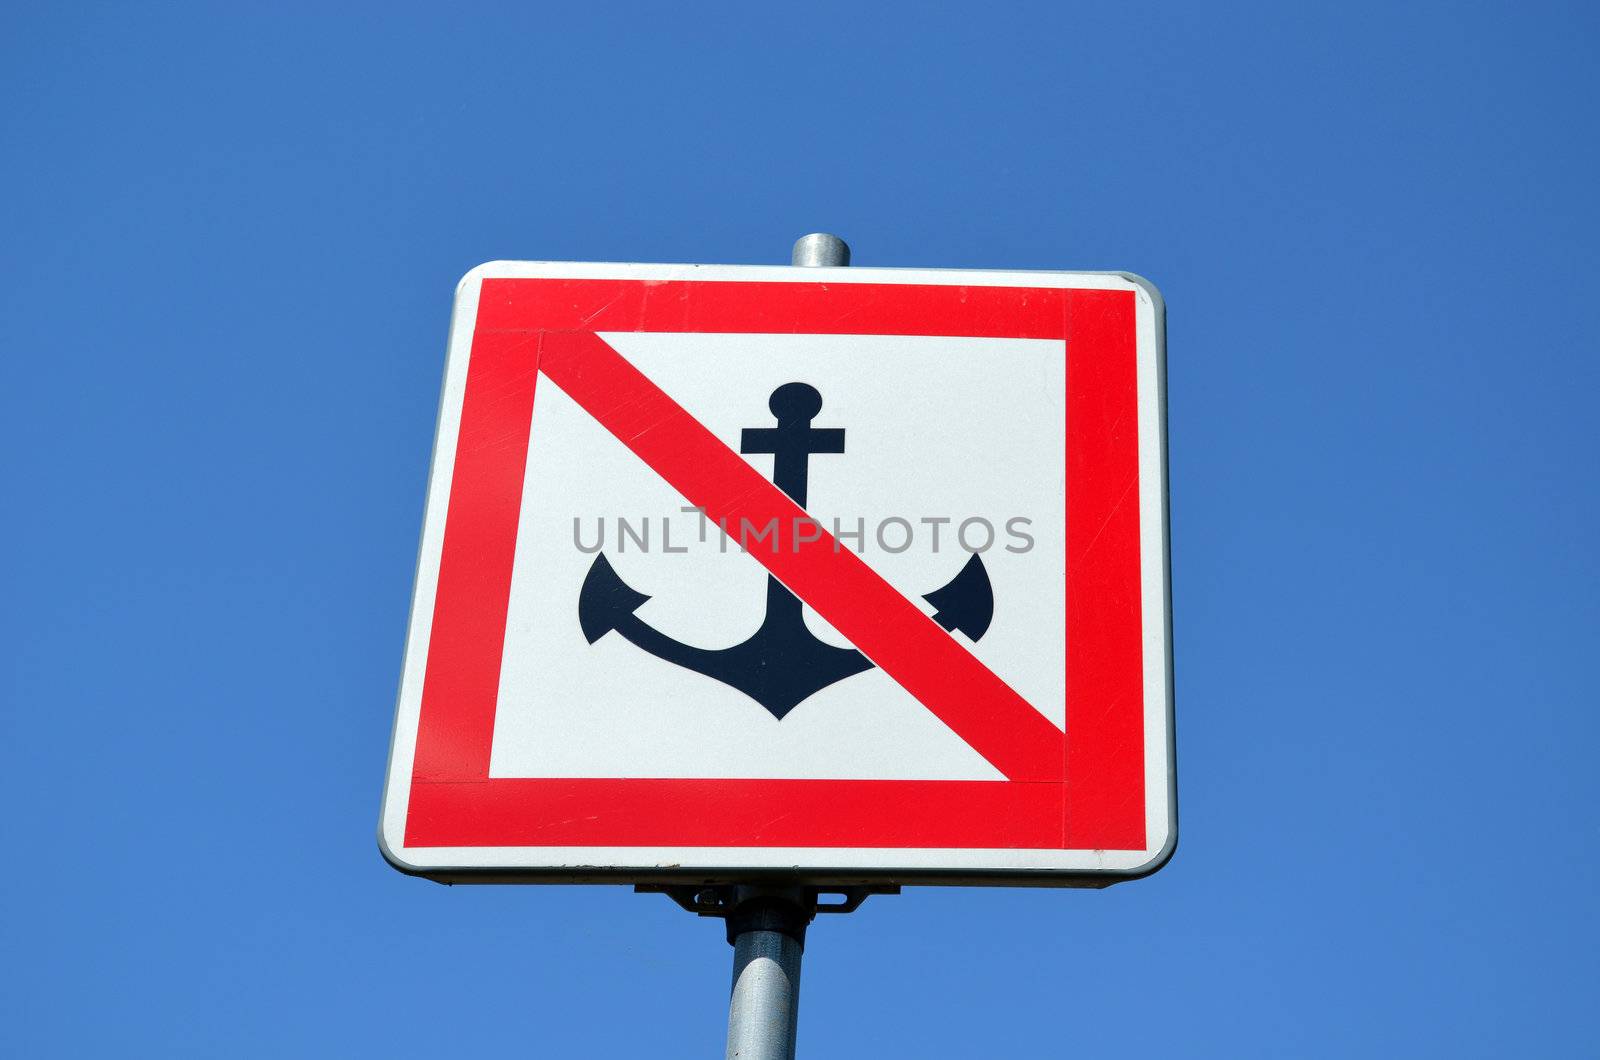 Warning sign prohibiting ships mooring riverside on background of blue sky. Anchor crossed red line.